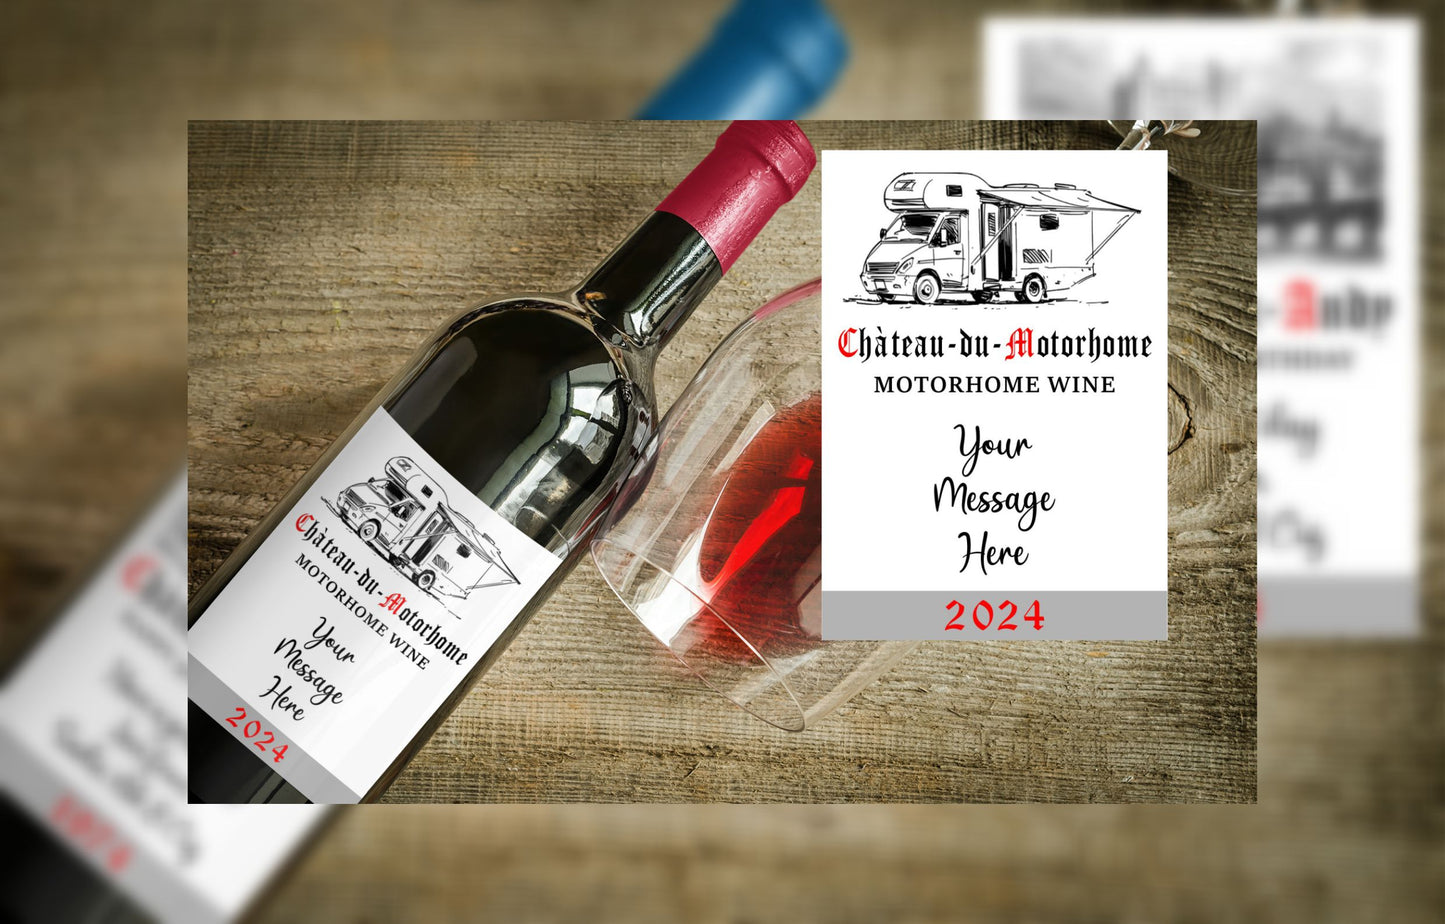 Motorhome Wine Bottle Label x2 - Chateau du Motorhome - Personalise Year & Message - To fit Most Alcohol Bottles Custom Gift